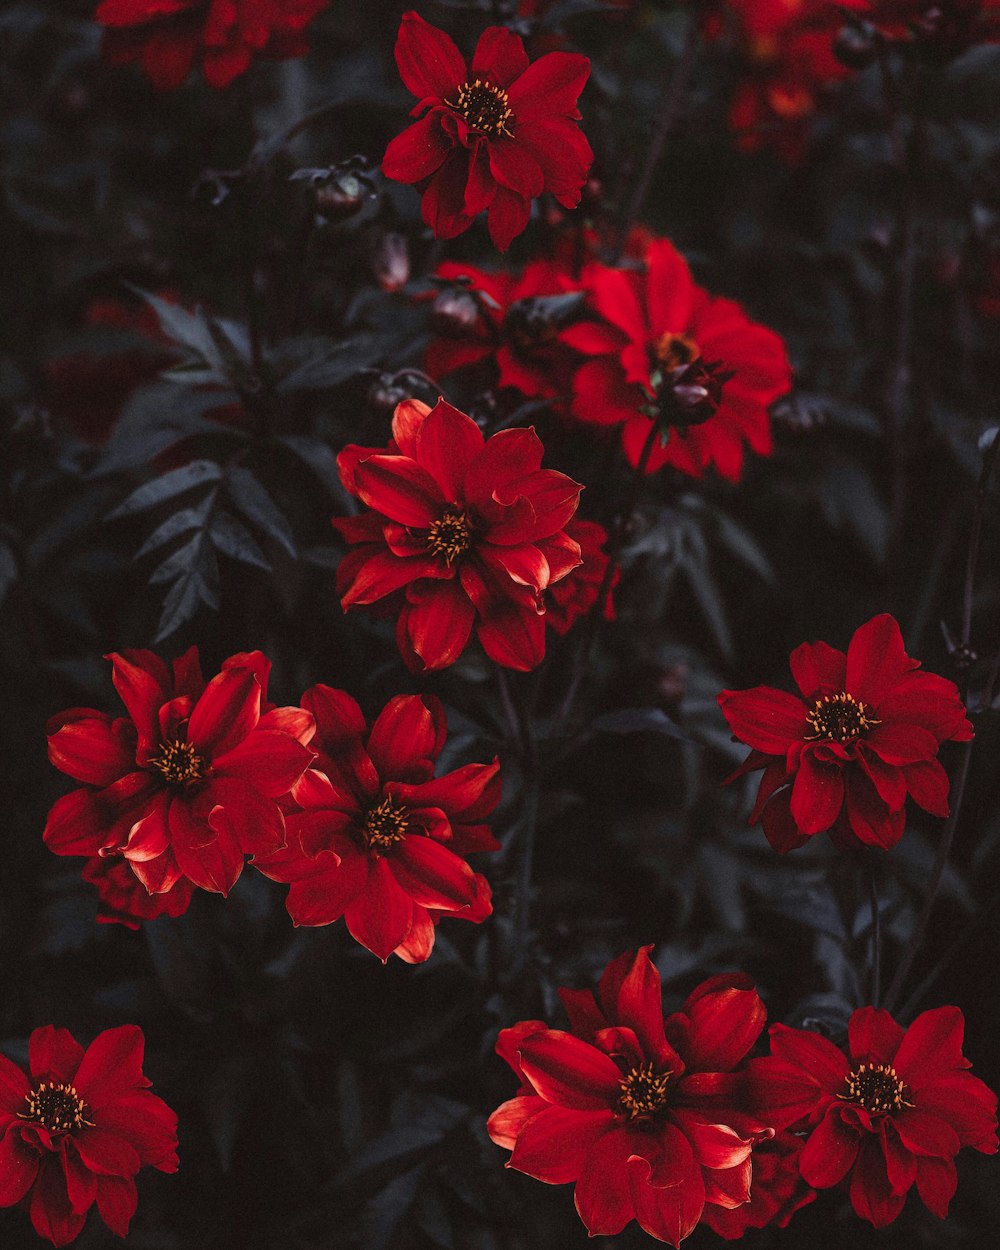 100+ Red Flower Pictures | Download Free Images on Unsplash